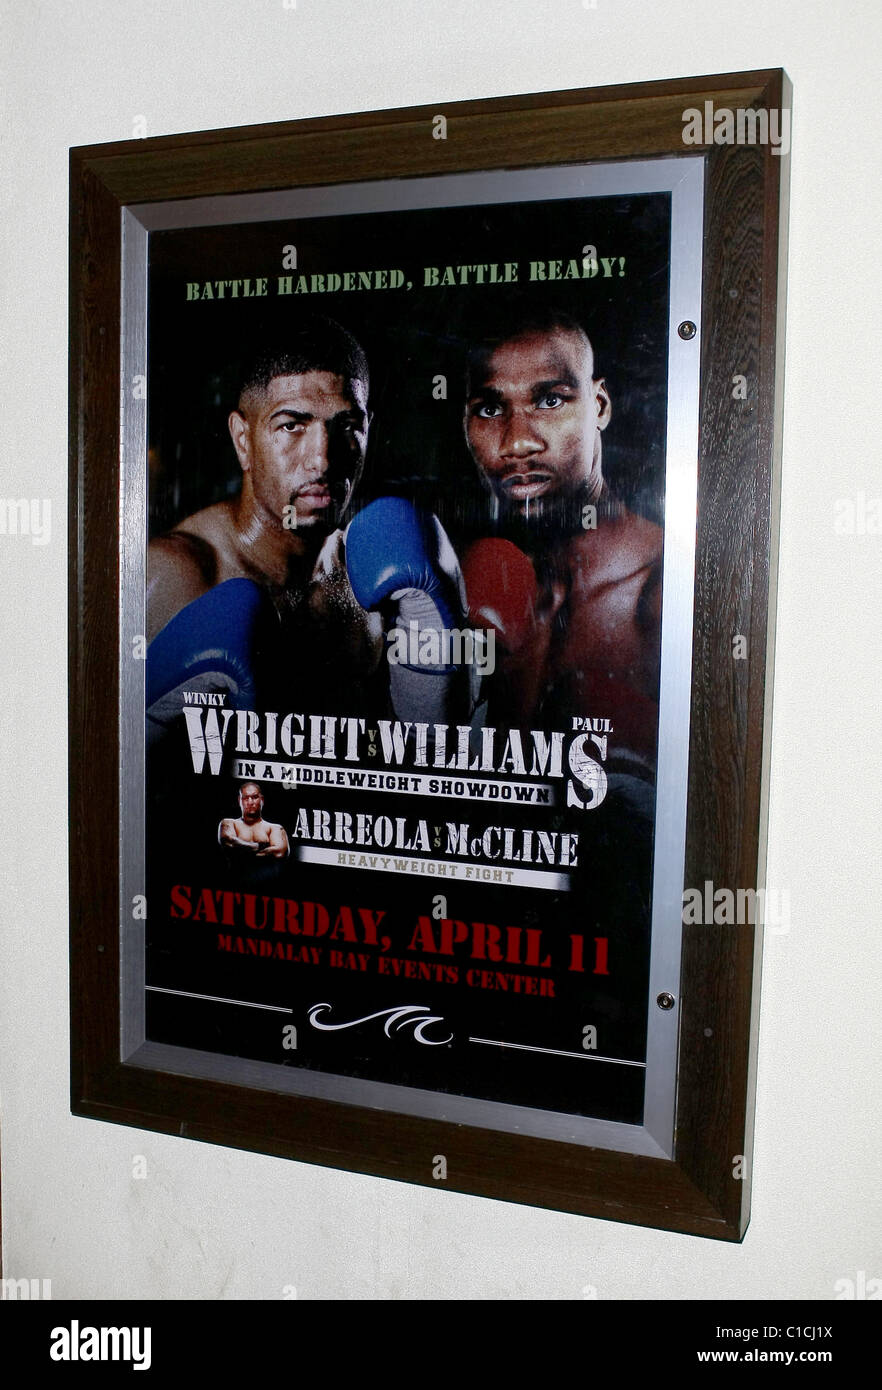 Atmosphere Pre-fight party for Winky Wright vs Paul Williams at Mandalay Bay Las Vegas, Nevada - 10.04.09 Stock Photo